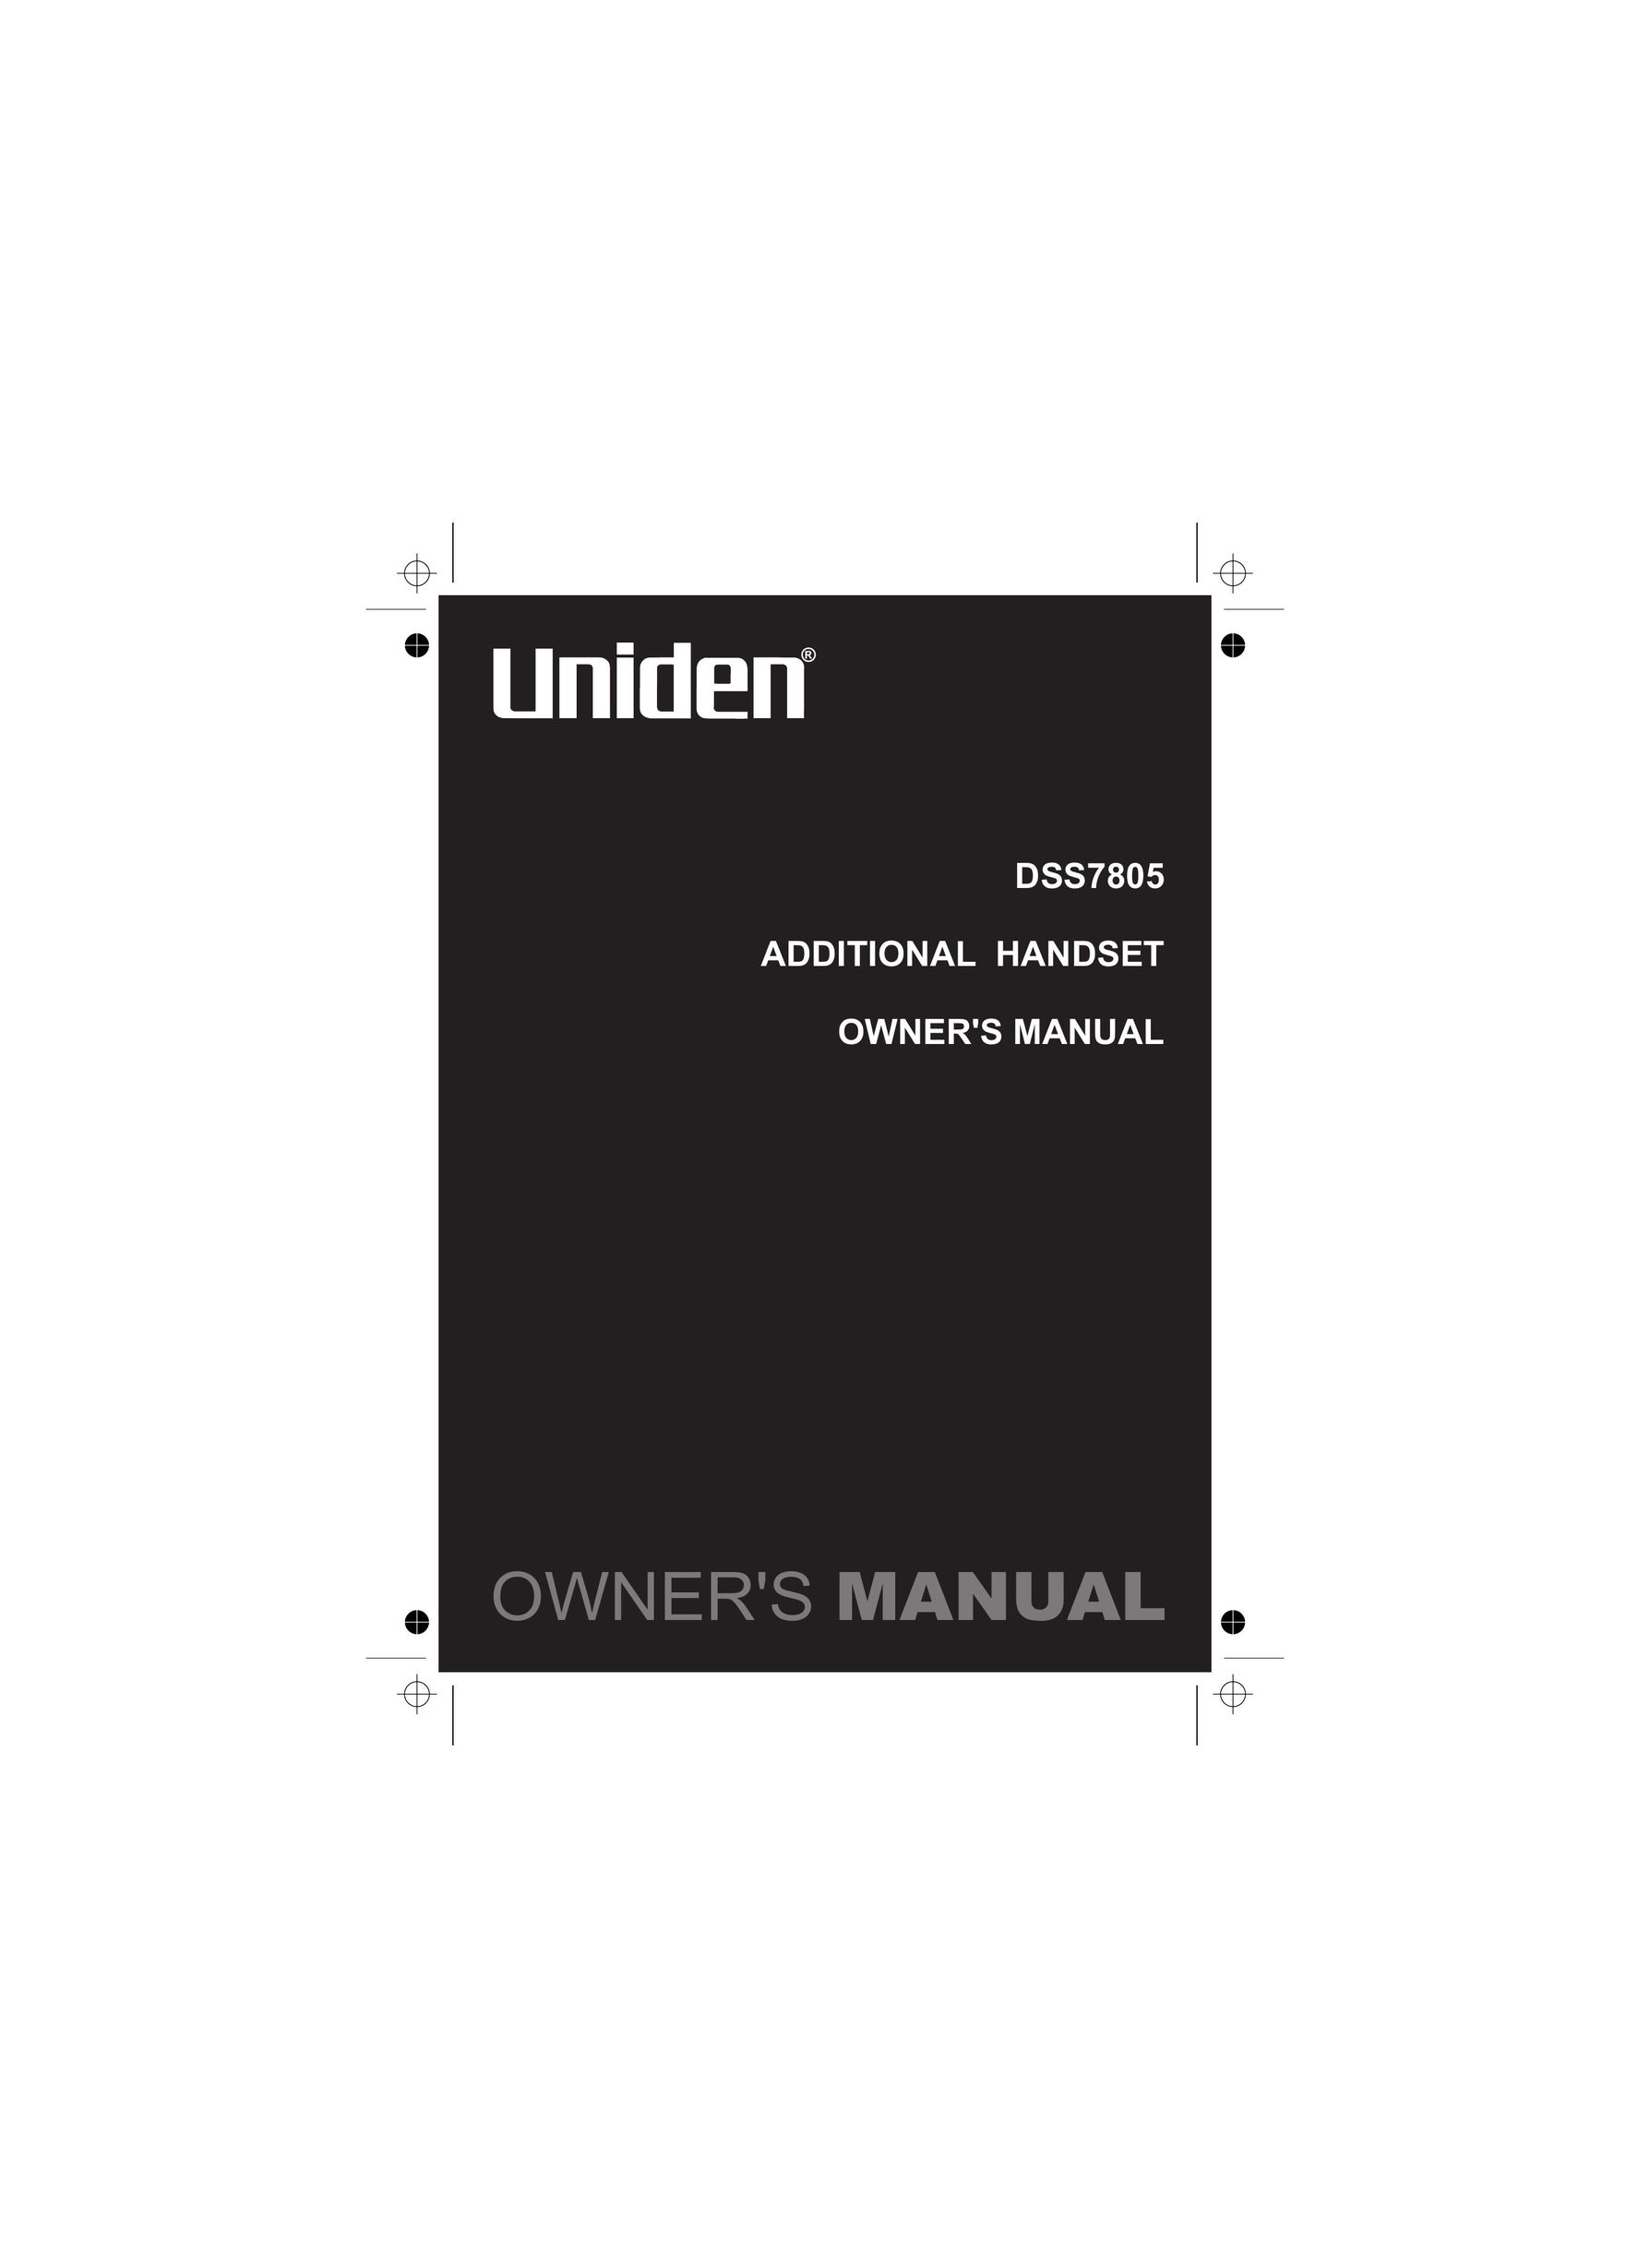 Uniden DSS7805 Telephone User Manual